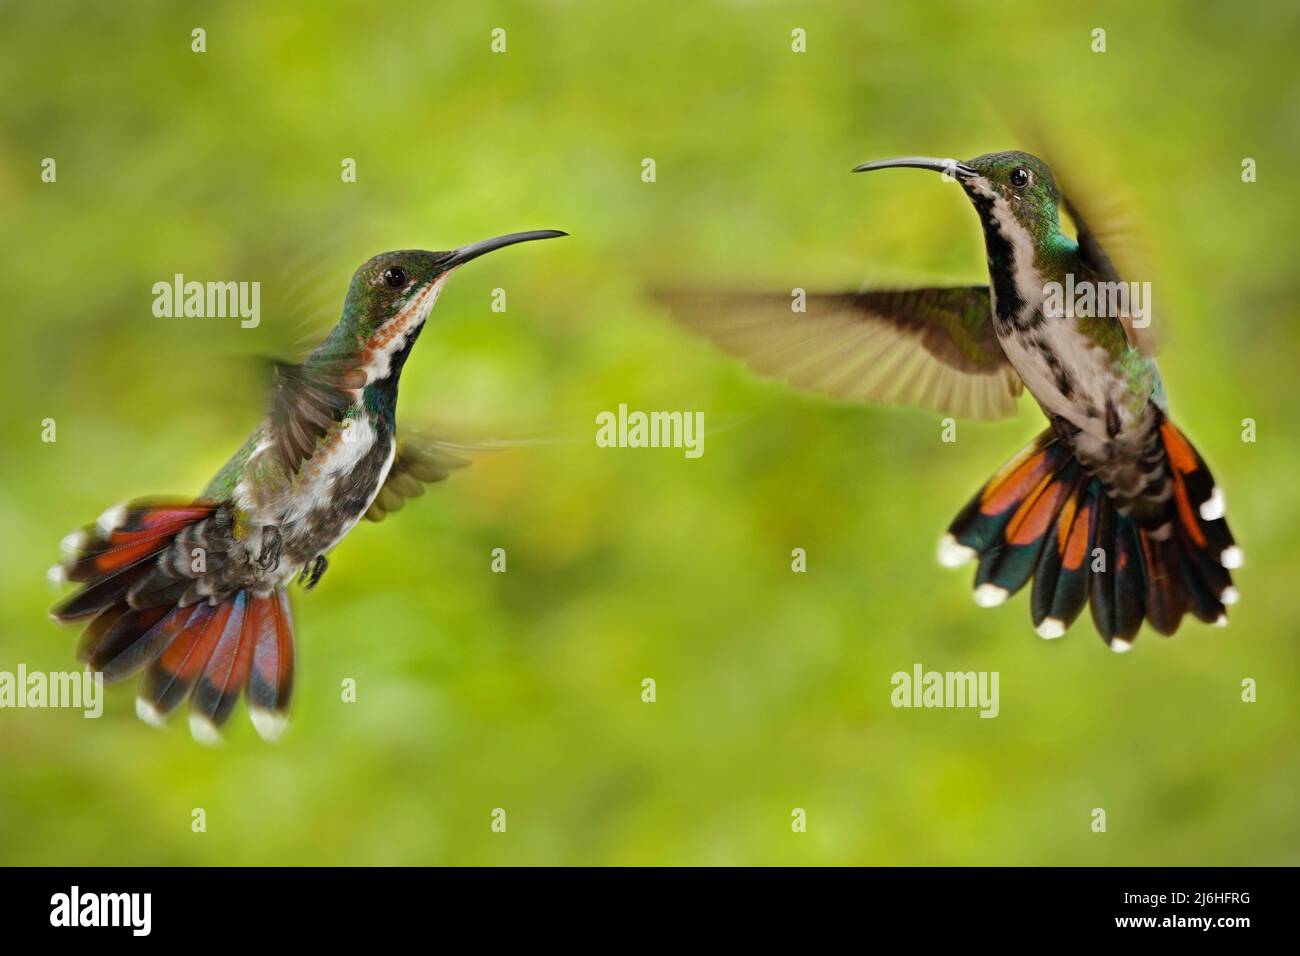 Couple of two hummingbirds Green-breasted Mango in the fly with light green and orange flowered background, wild tropic bird in the nature habitat, pa Stock Photo